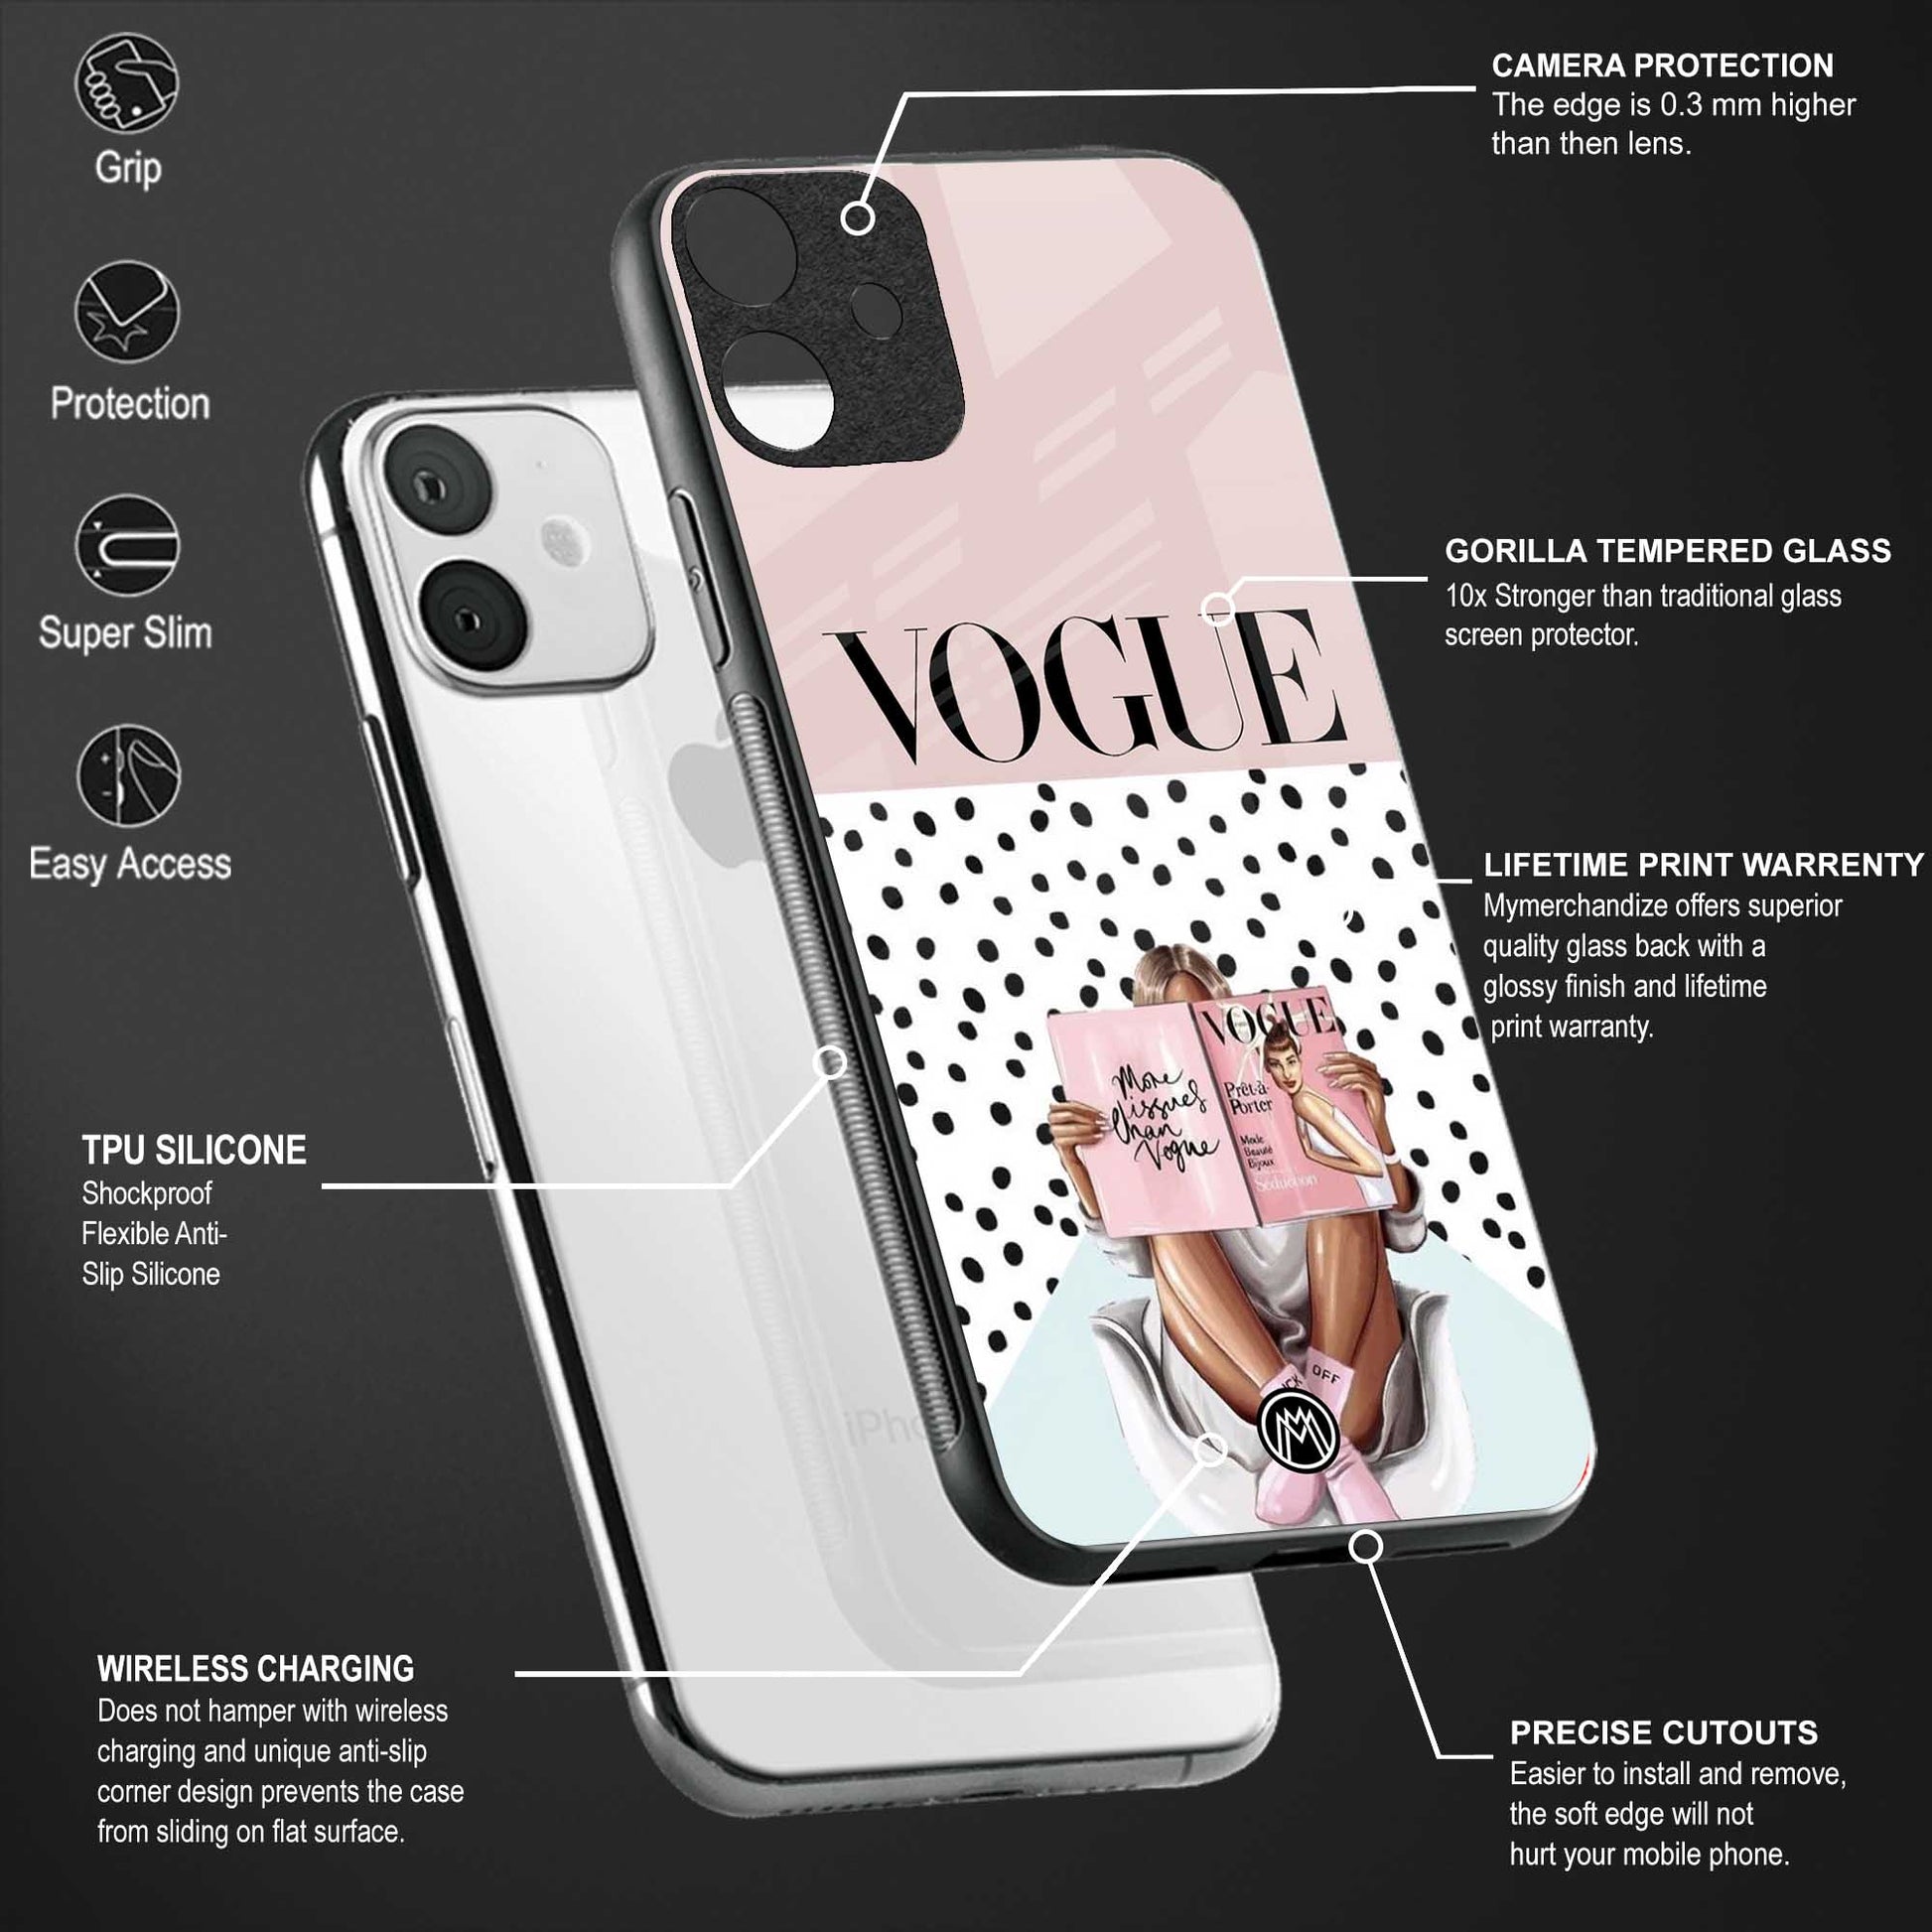 vogue queen glass case for iphone 6 image-4